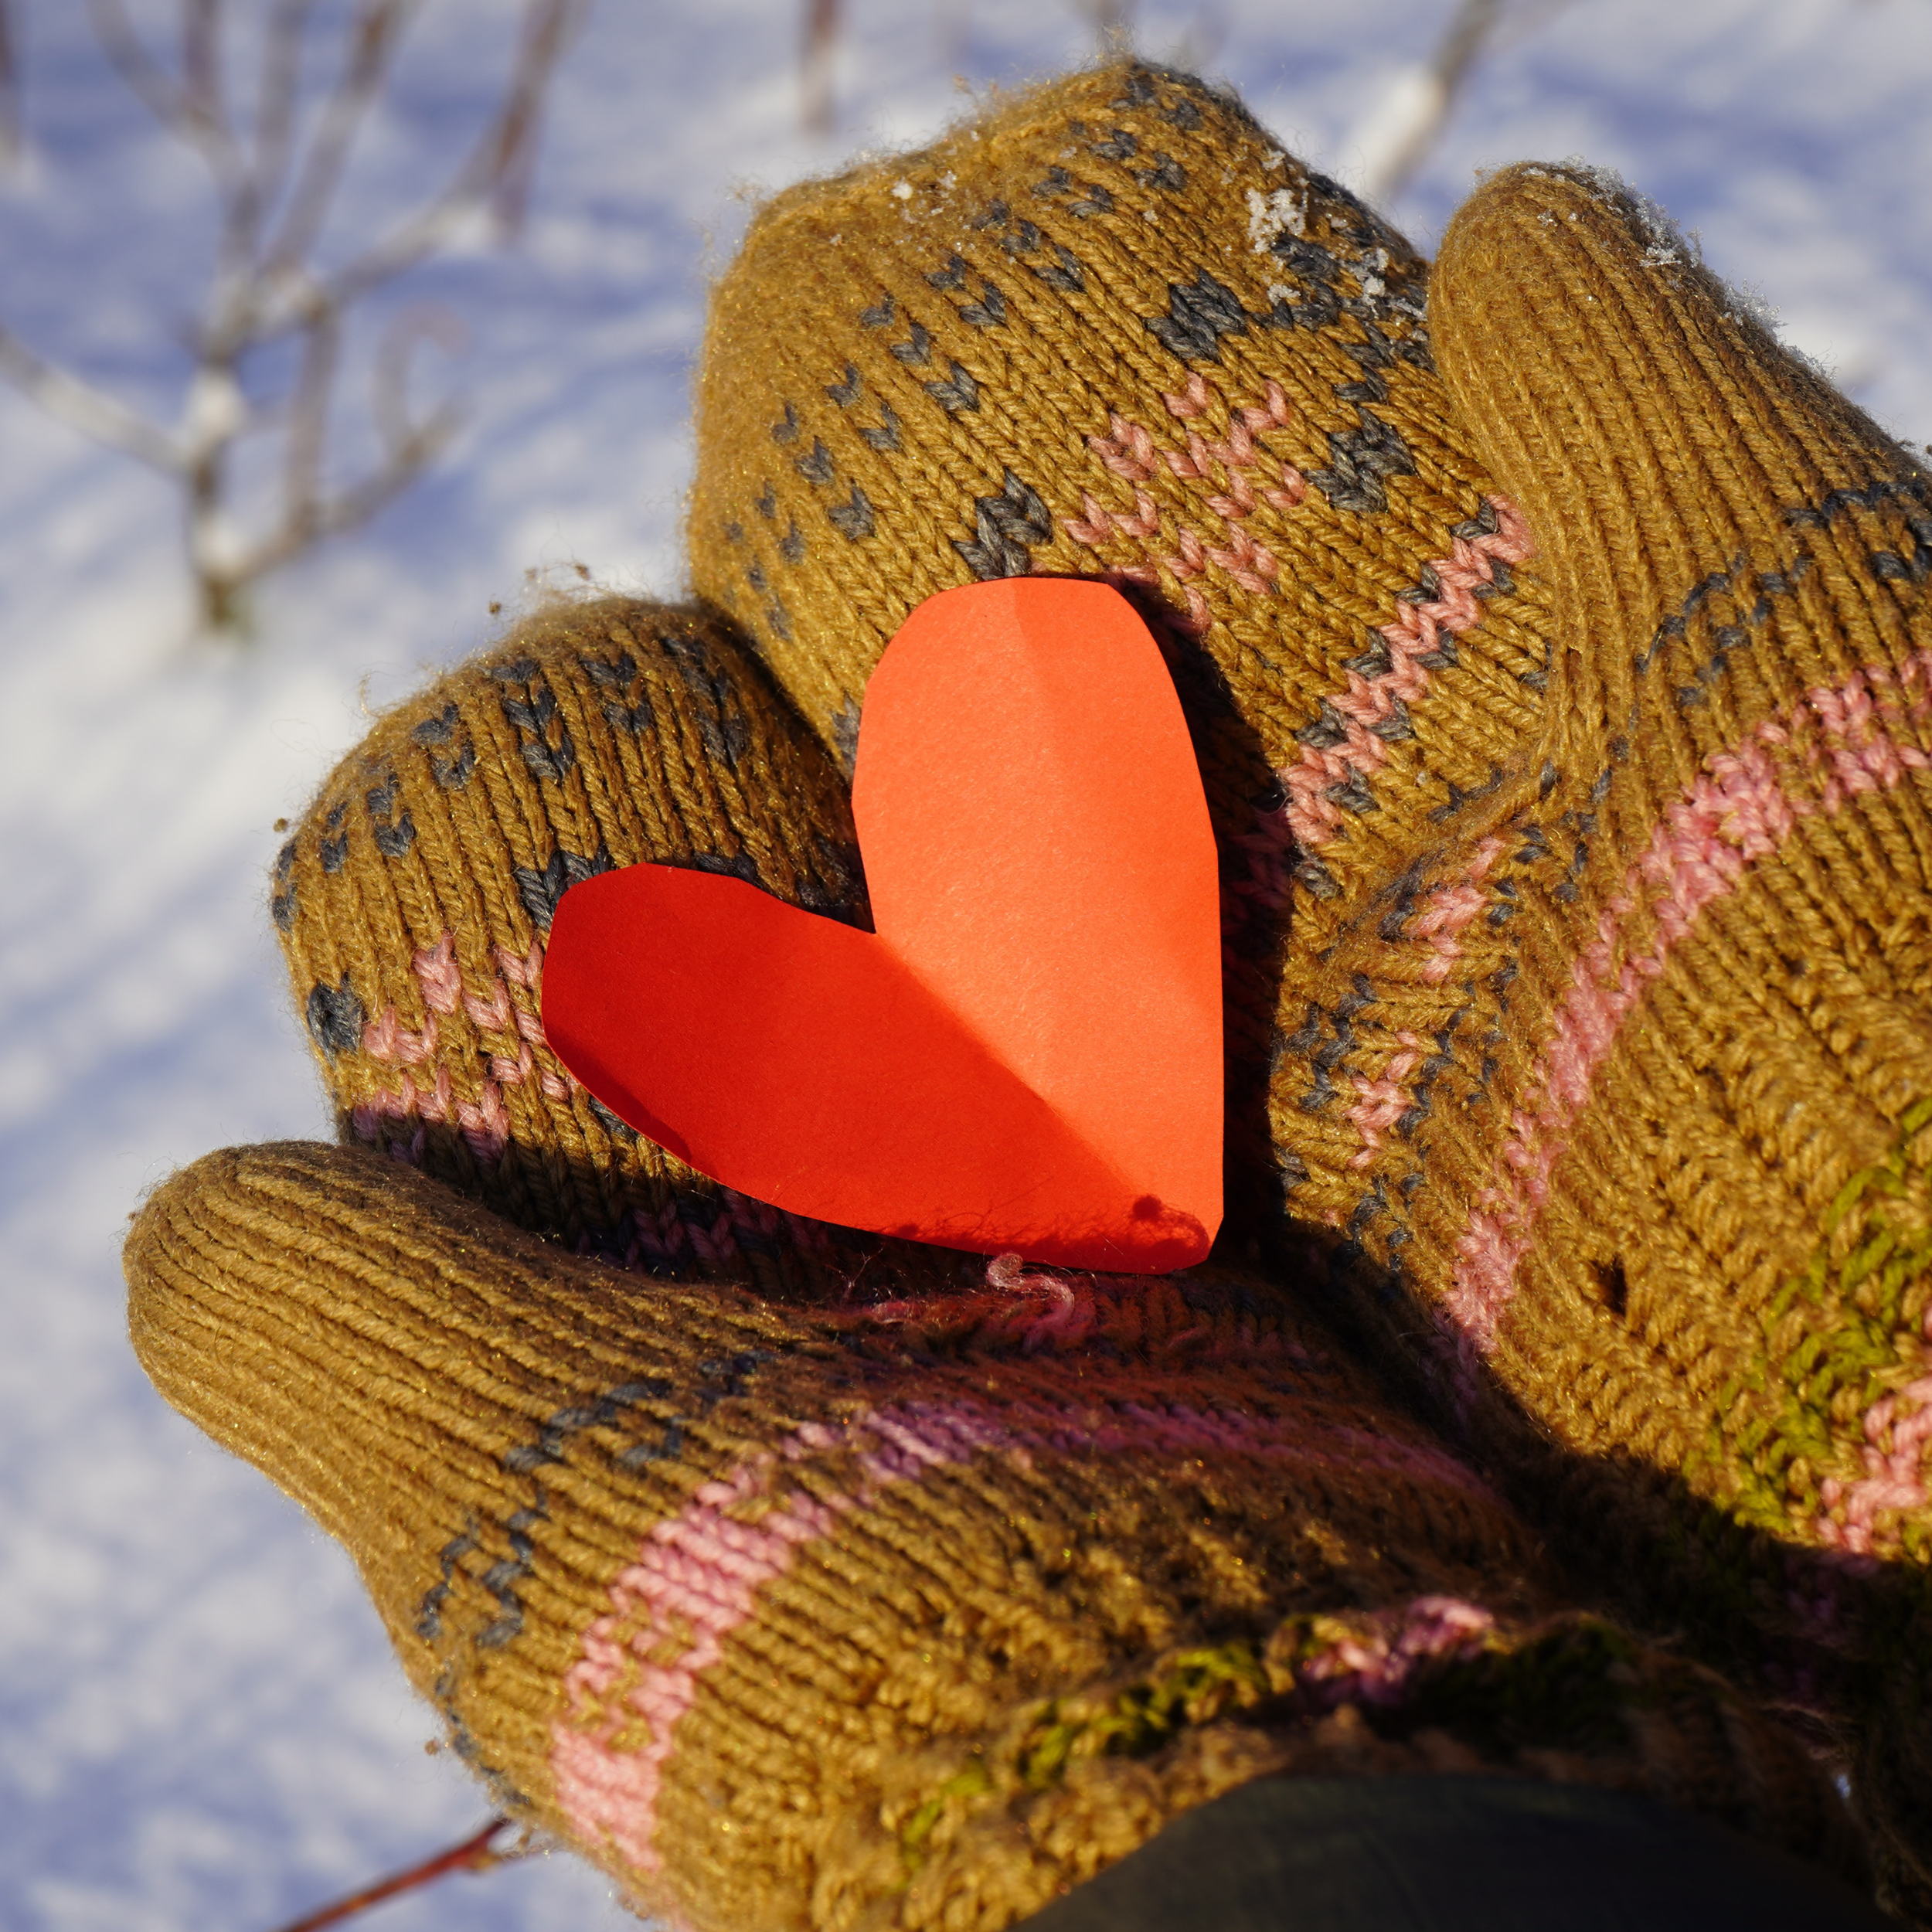 Hands wearing green and pink mittens hold out a red paper heart